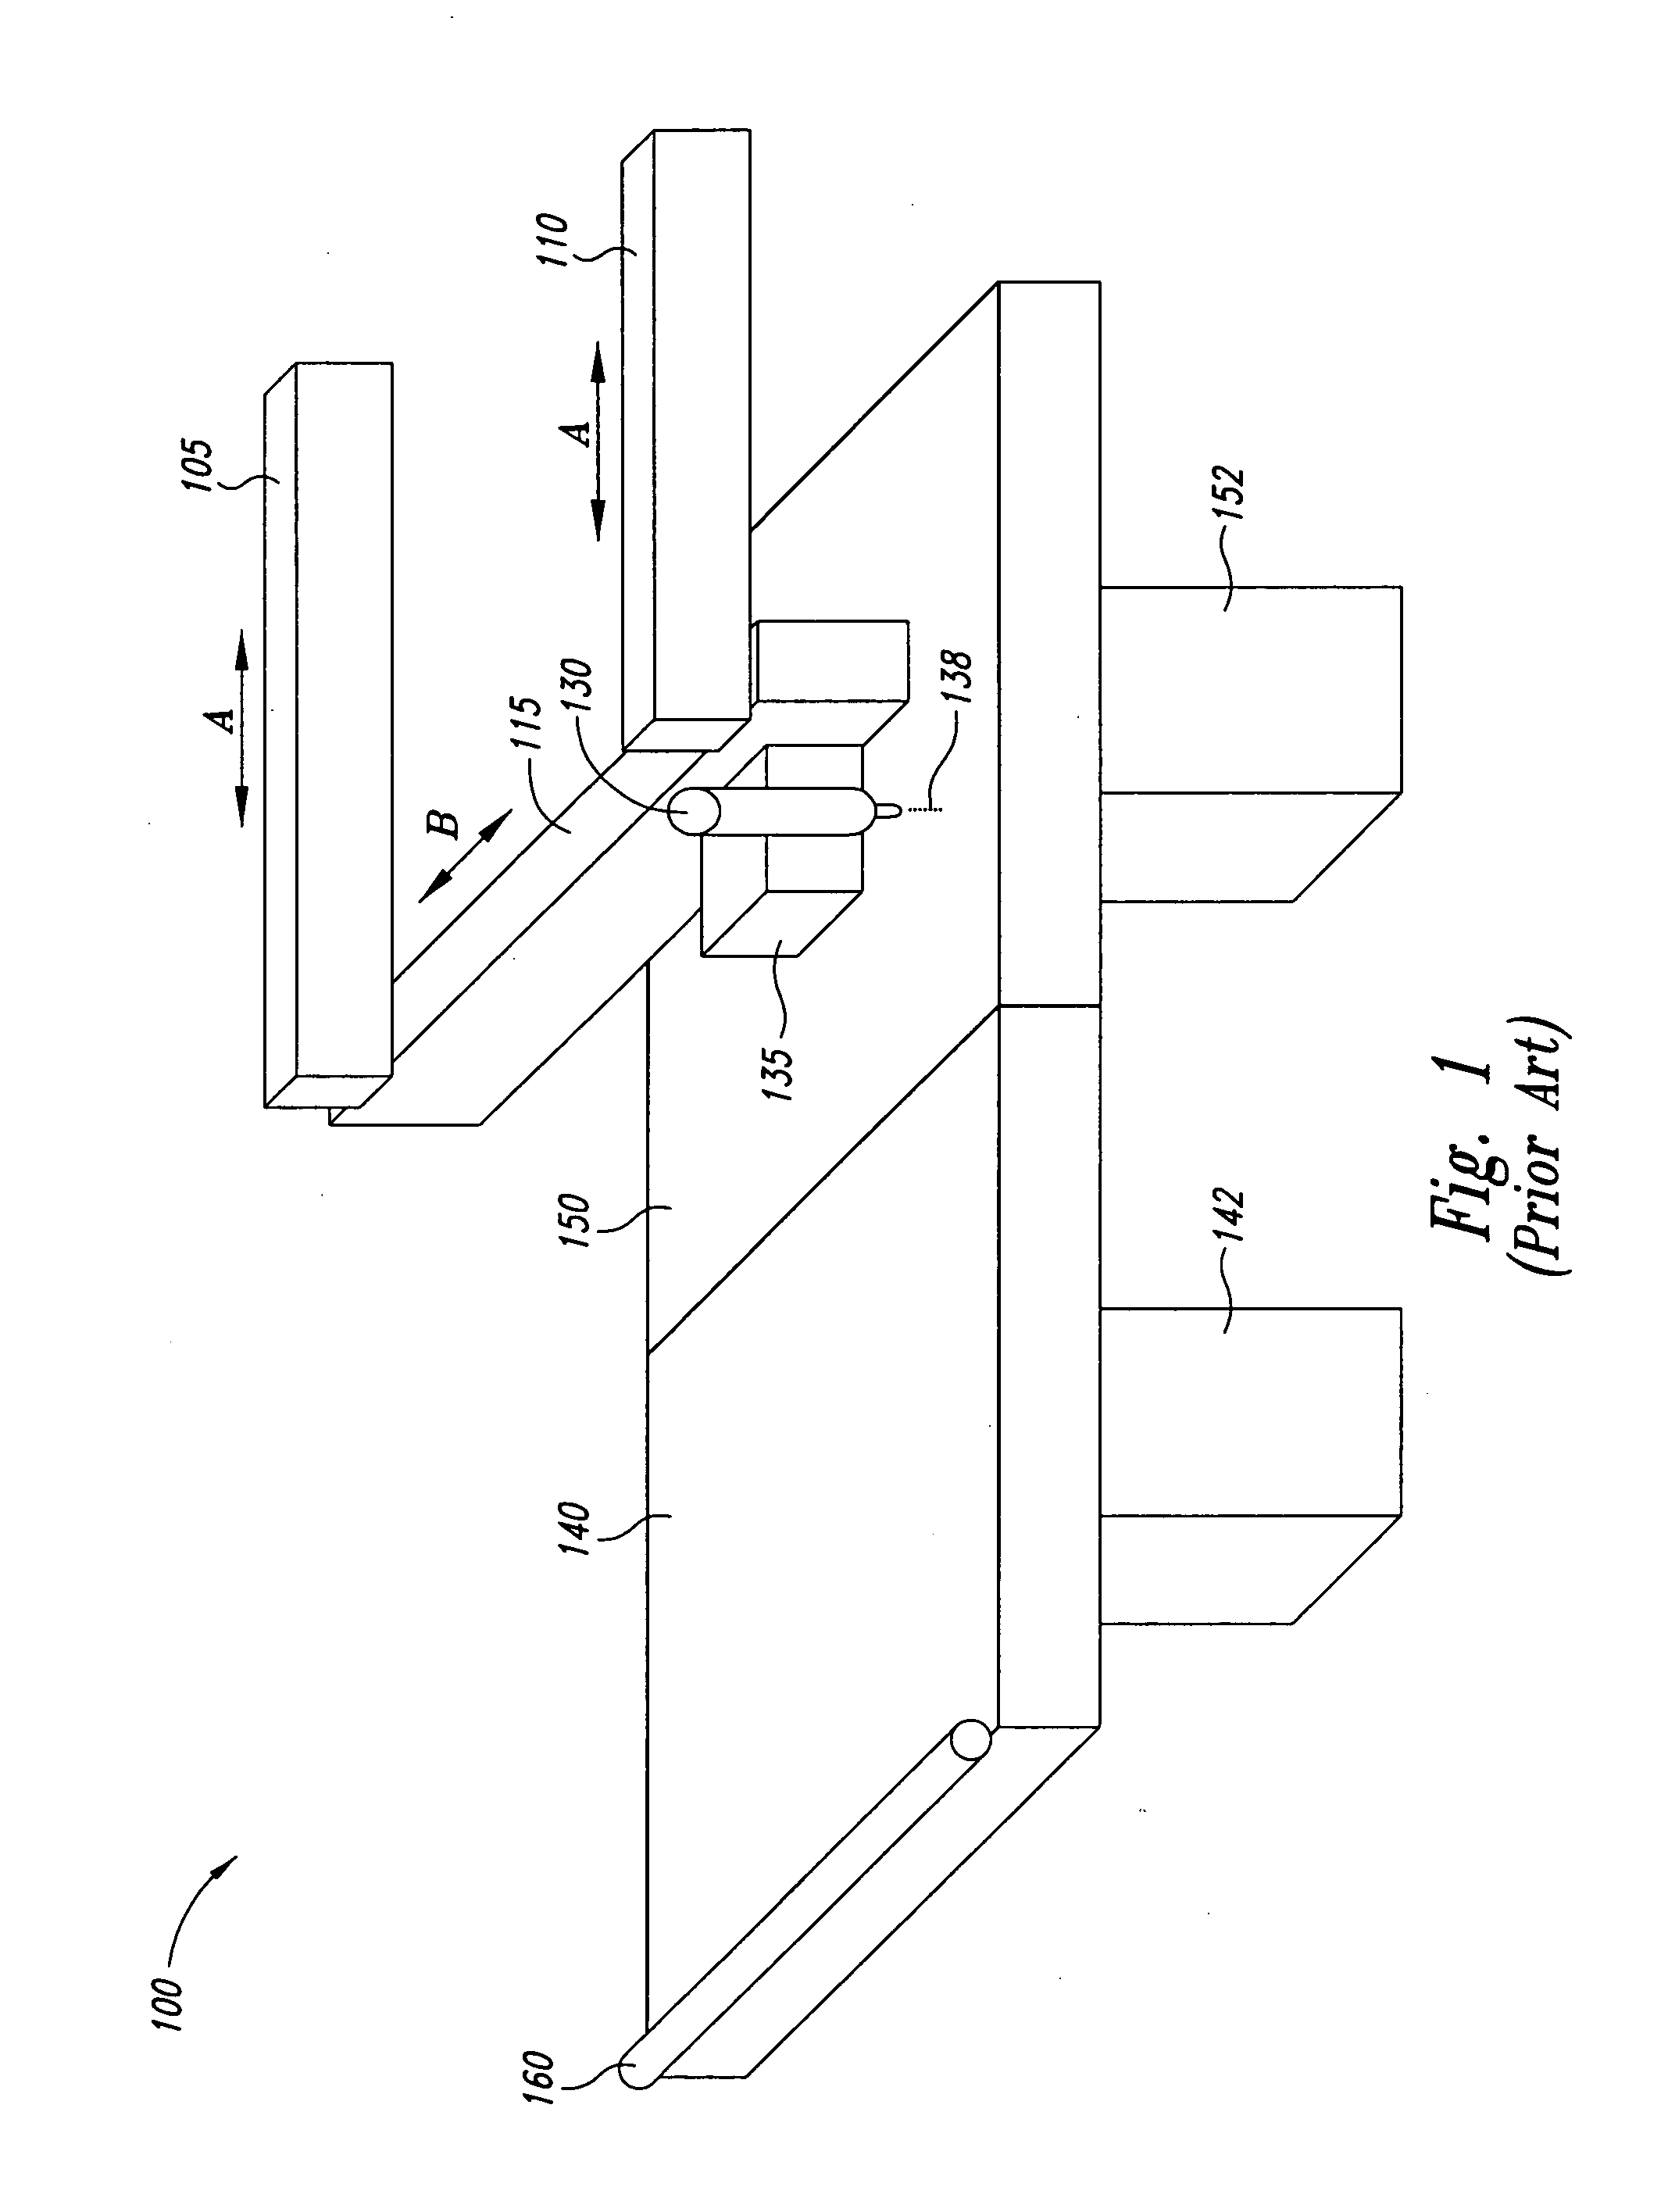 Method and system for repairing endosseous implants, such as with a bone graft implant